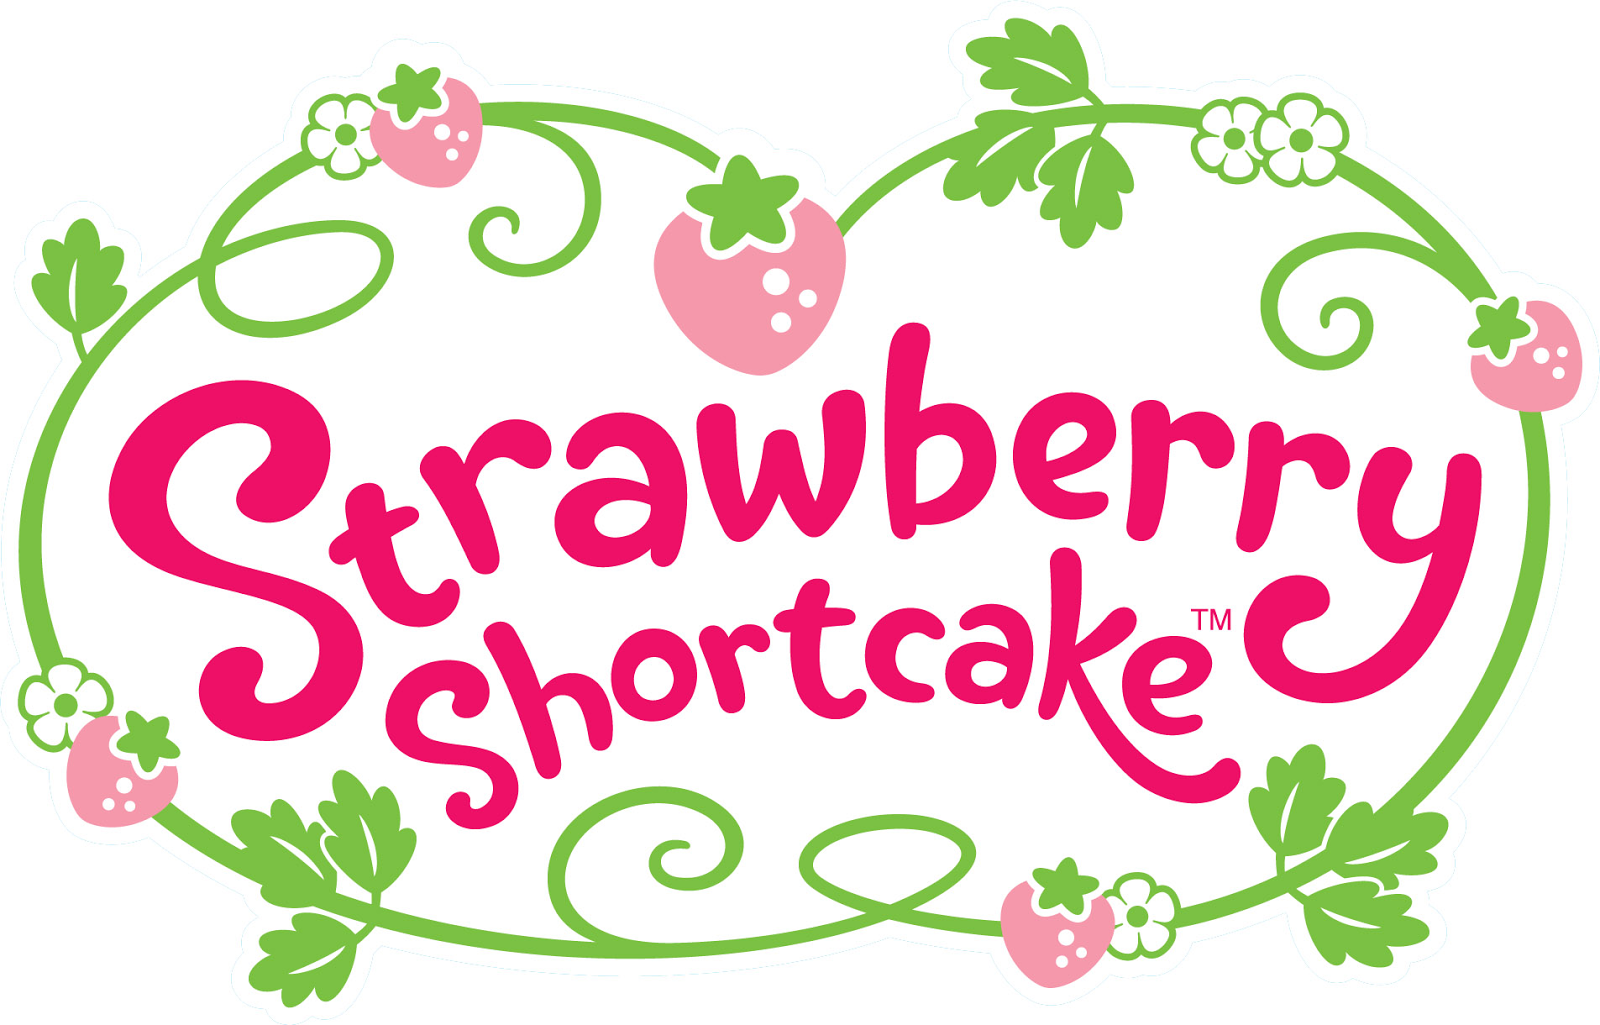 Wallpapers For > Baby Strawberry Shortcake Wallpaper